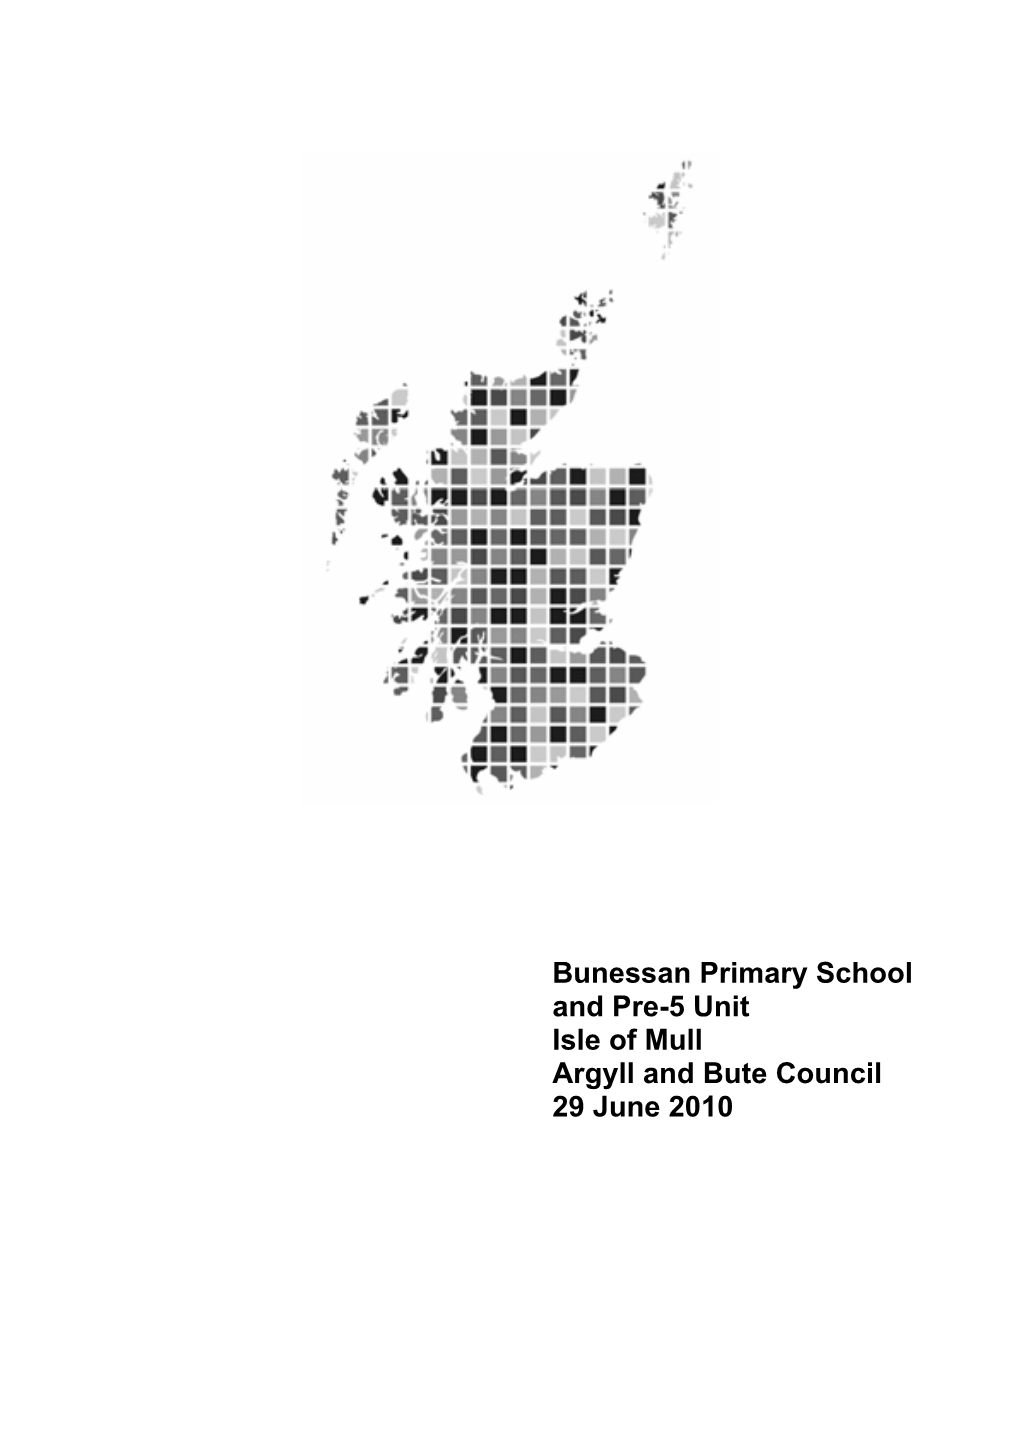 Bunessan Primary School and Pre-5 Unit Isle of Mull Inspection 29/06